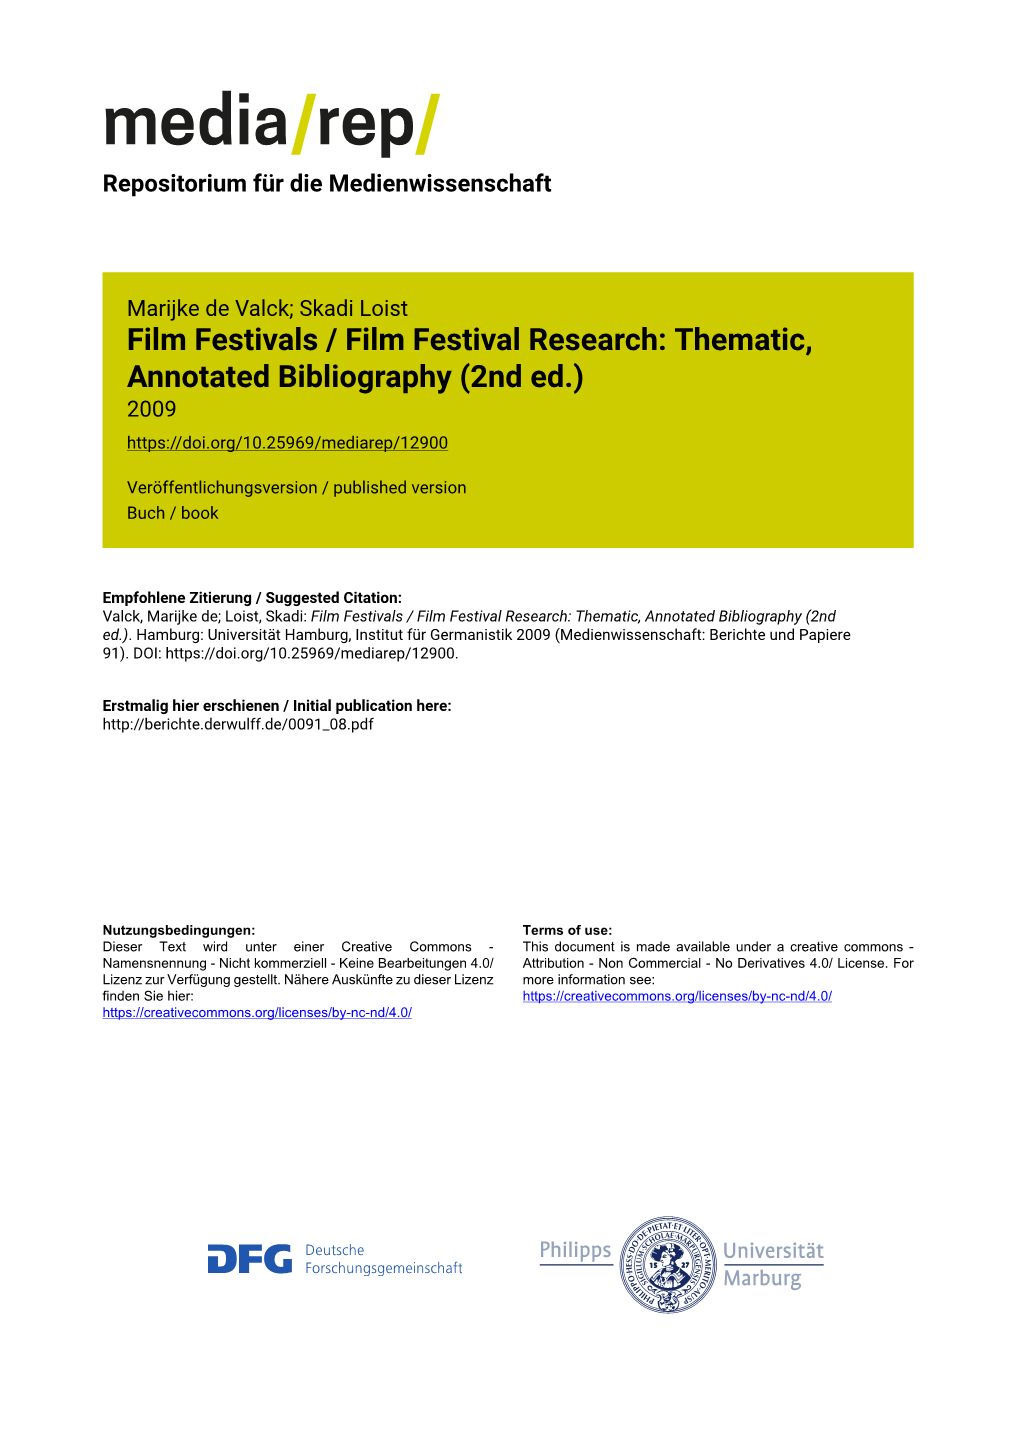 Film Festivals / Film Festival Research: Thematic, Annotated Bibliography (2Nd Ed.) 2009